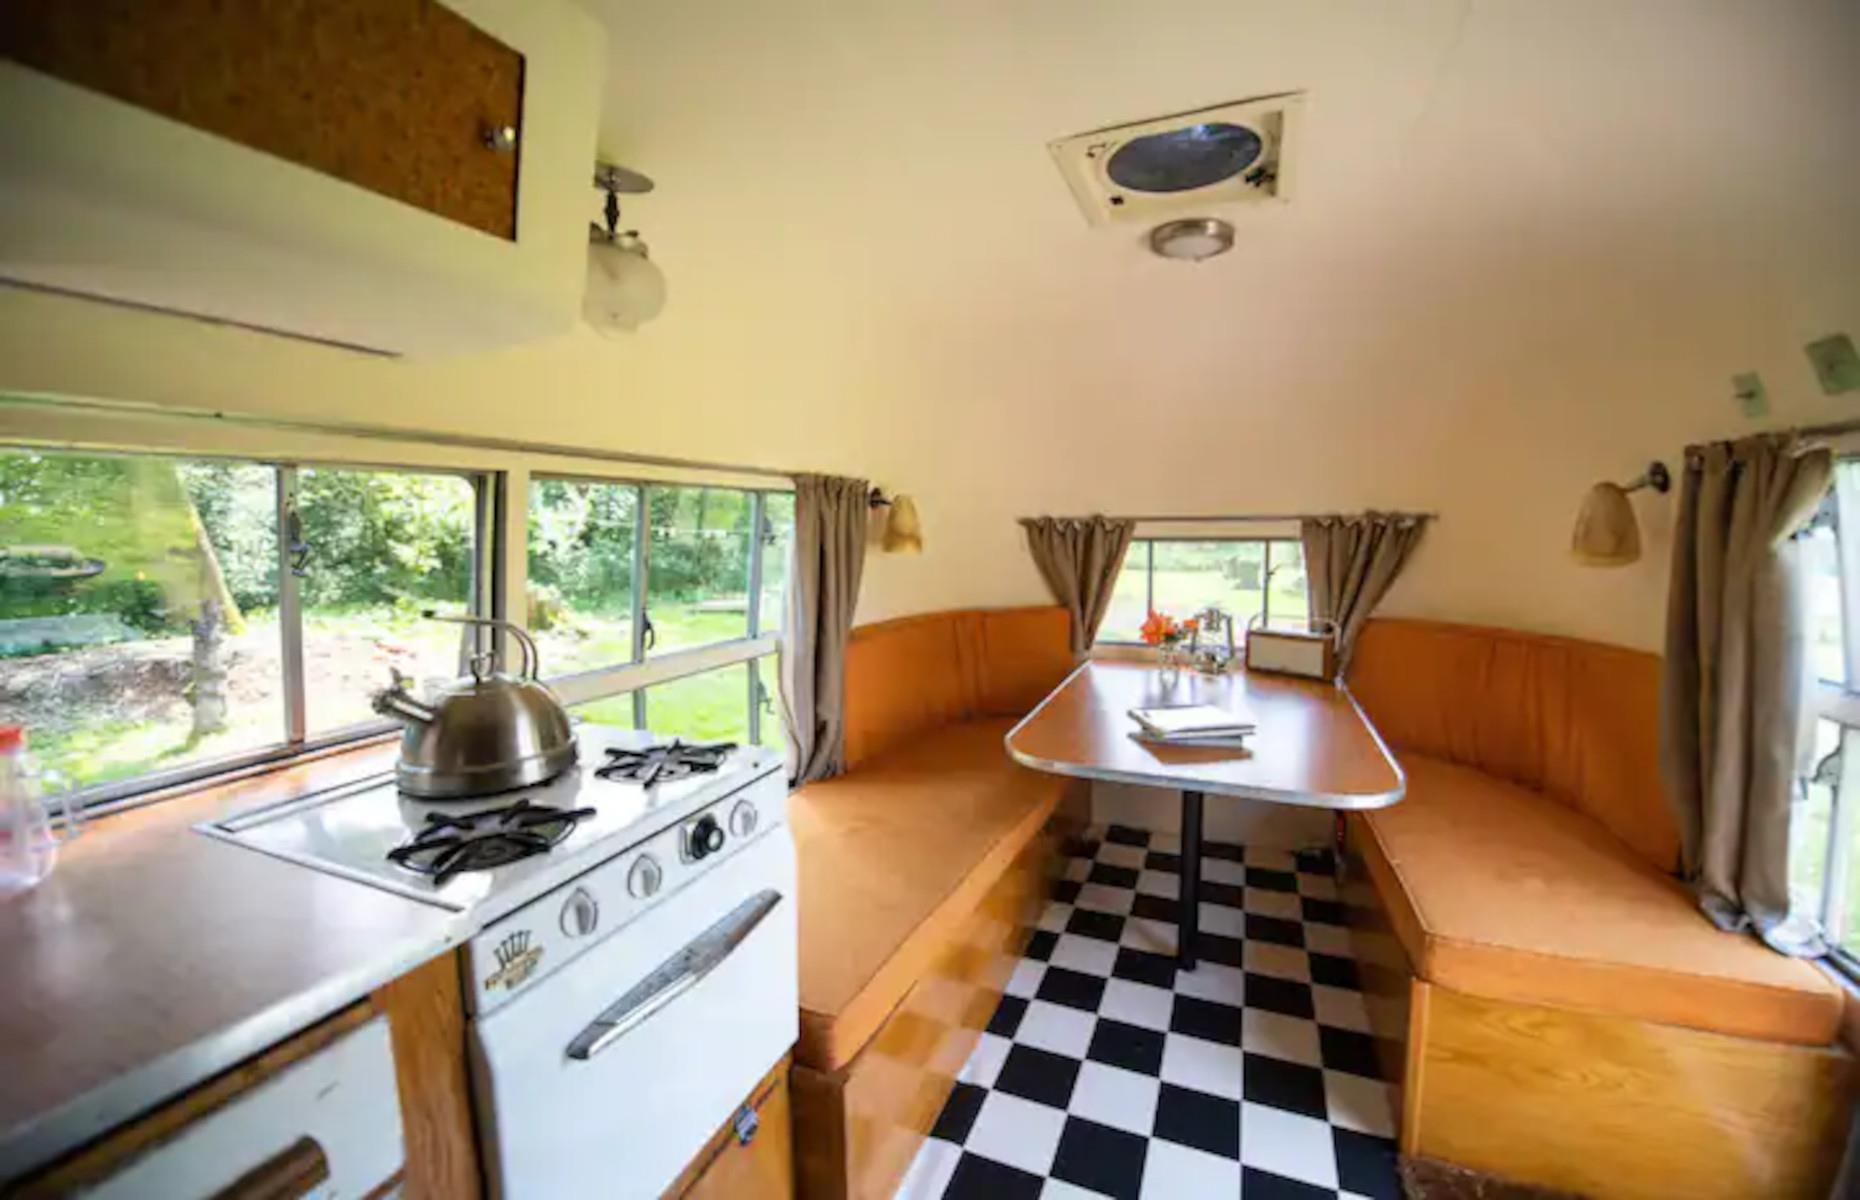 <p>The Airstream has been lovingly restored to combine modern amenities with retro touches, including a <a href="https://www.loveproperty.com/gallerylist/89109/retro-kitchens-of-yesteryear-that-will-make-you-nostalgic">vintage but fully functioning kitchenette</a>, a bathroom consisting of a toilet and shower, a cozy double bed, and a cute seating area that looks like it was lifted straight out of a 1950s diner. These benches can also double as two extra twin beds if the kids are along for the ride! </p>